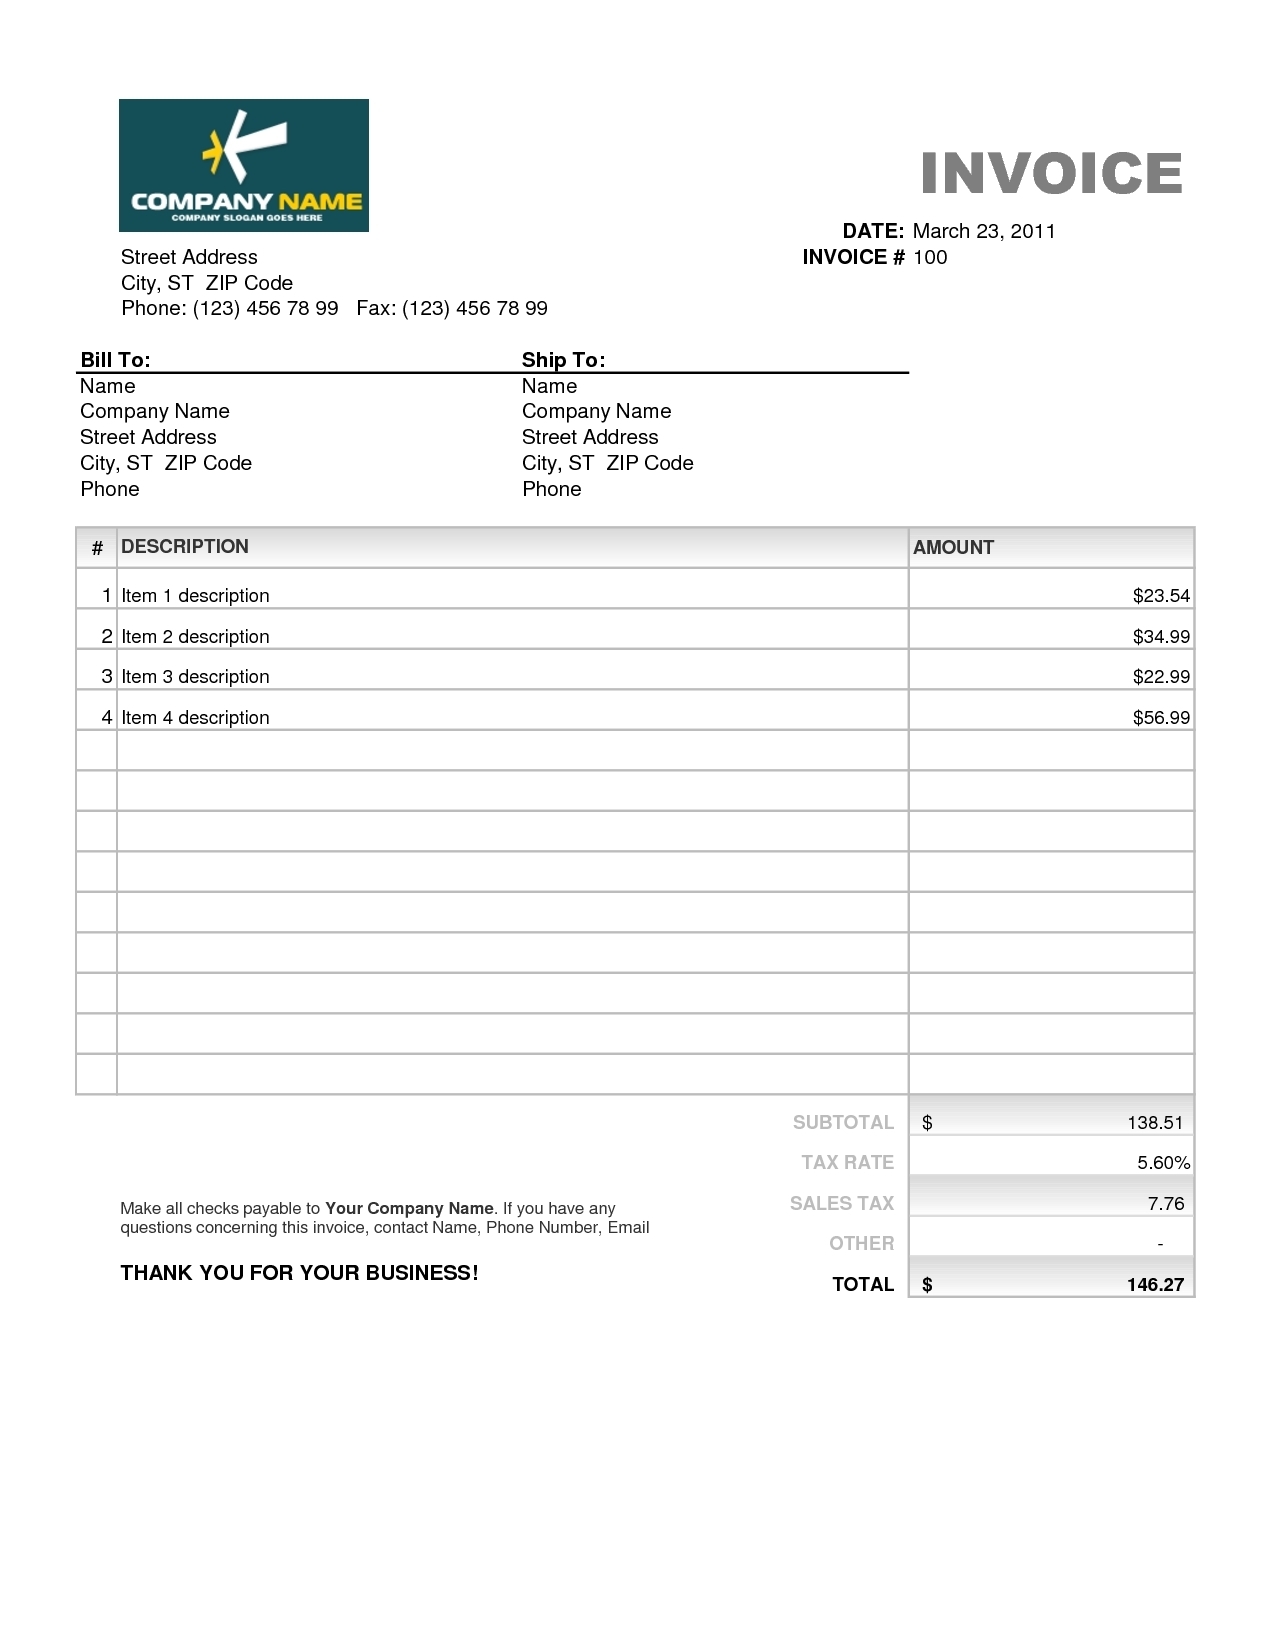 invoice excel template free download invoice template free 2016 invoice template excel download free